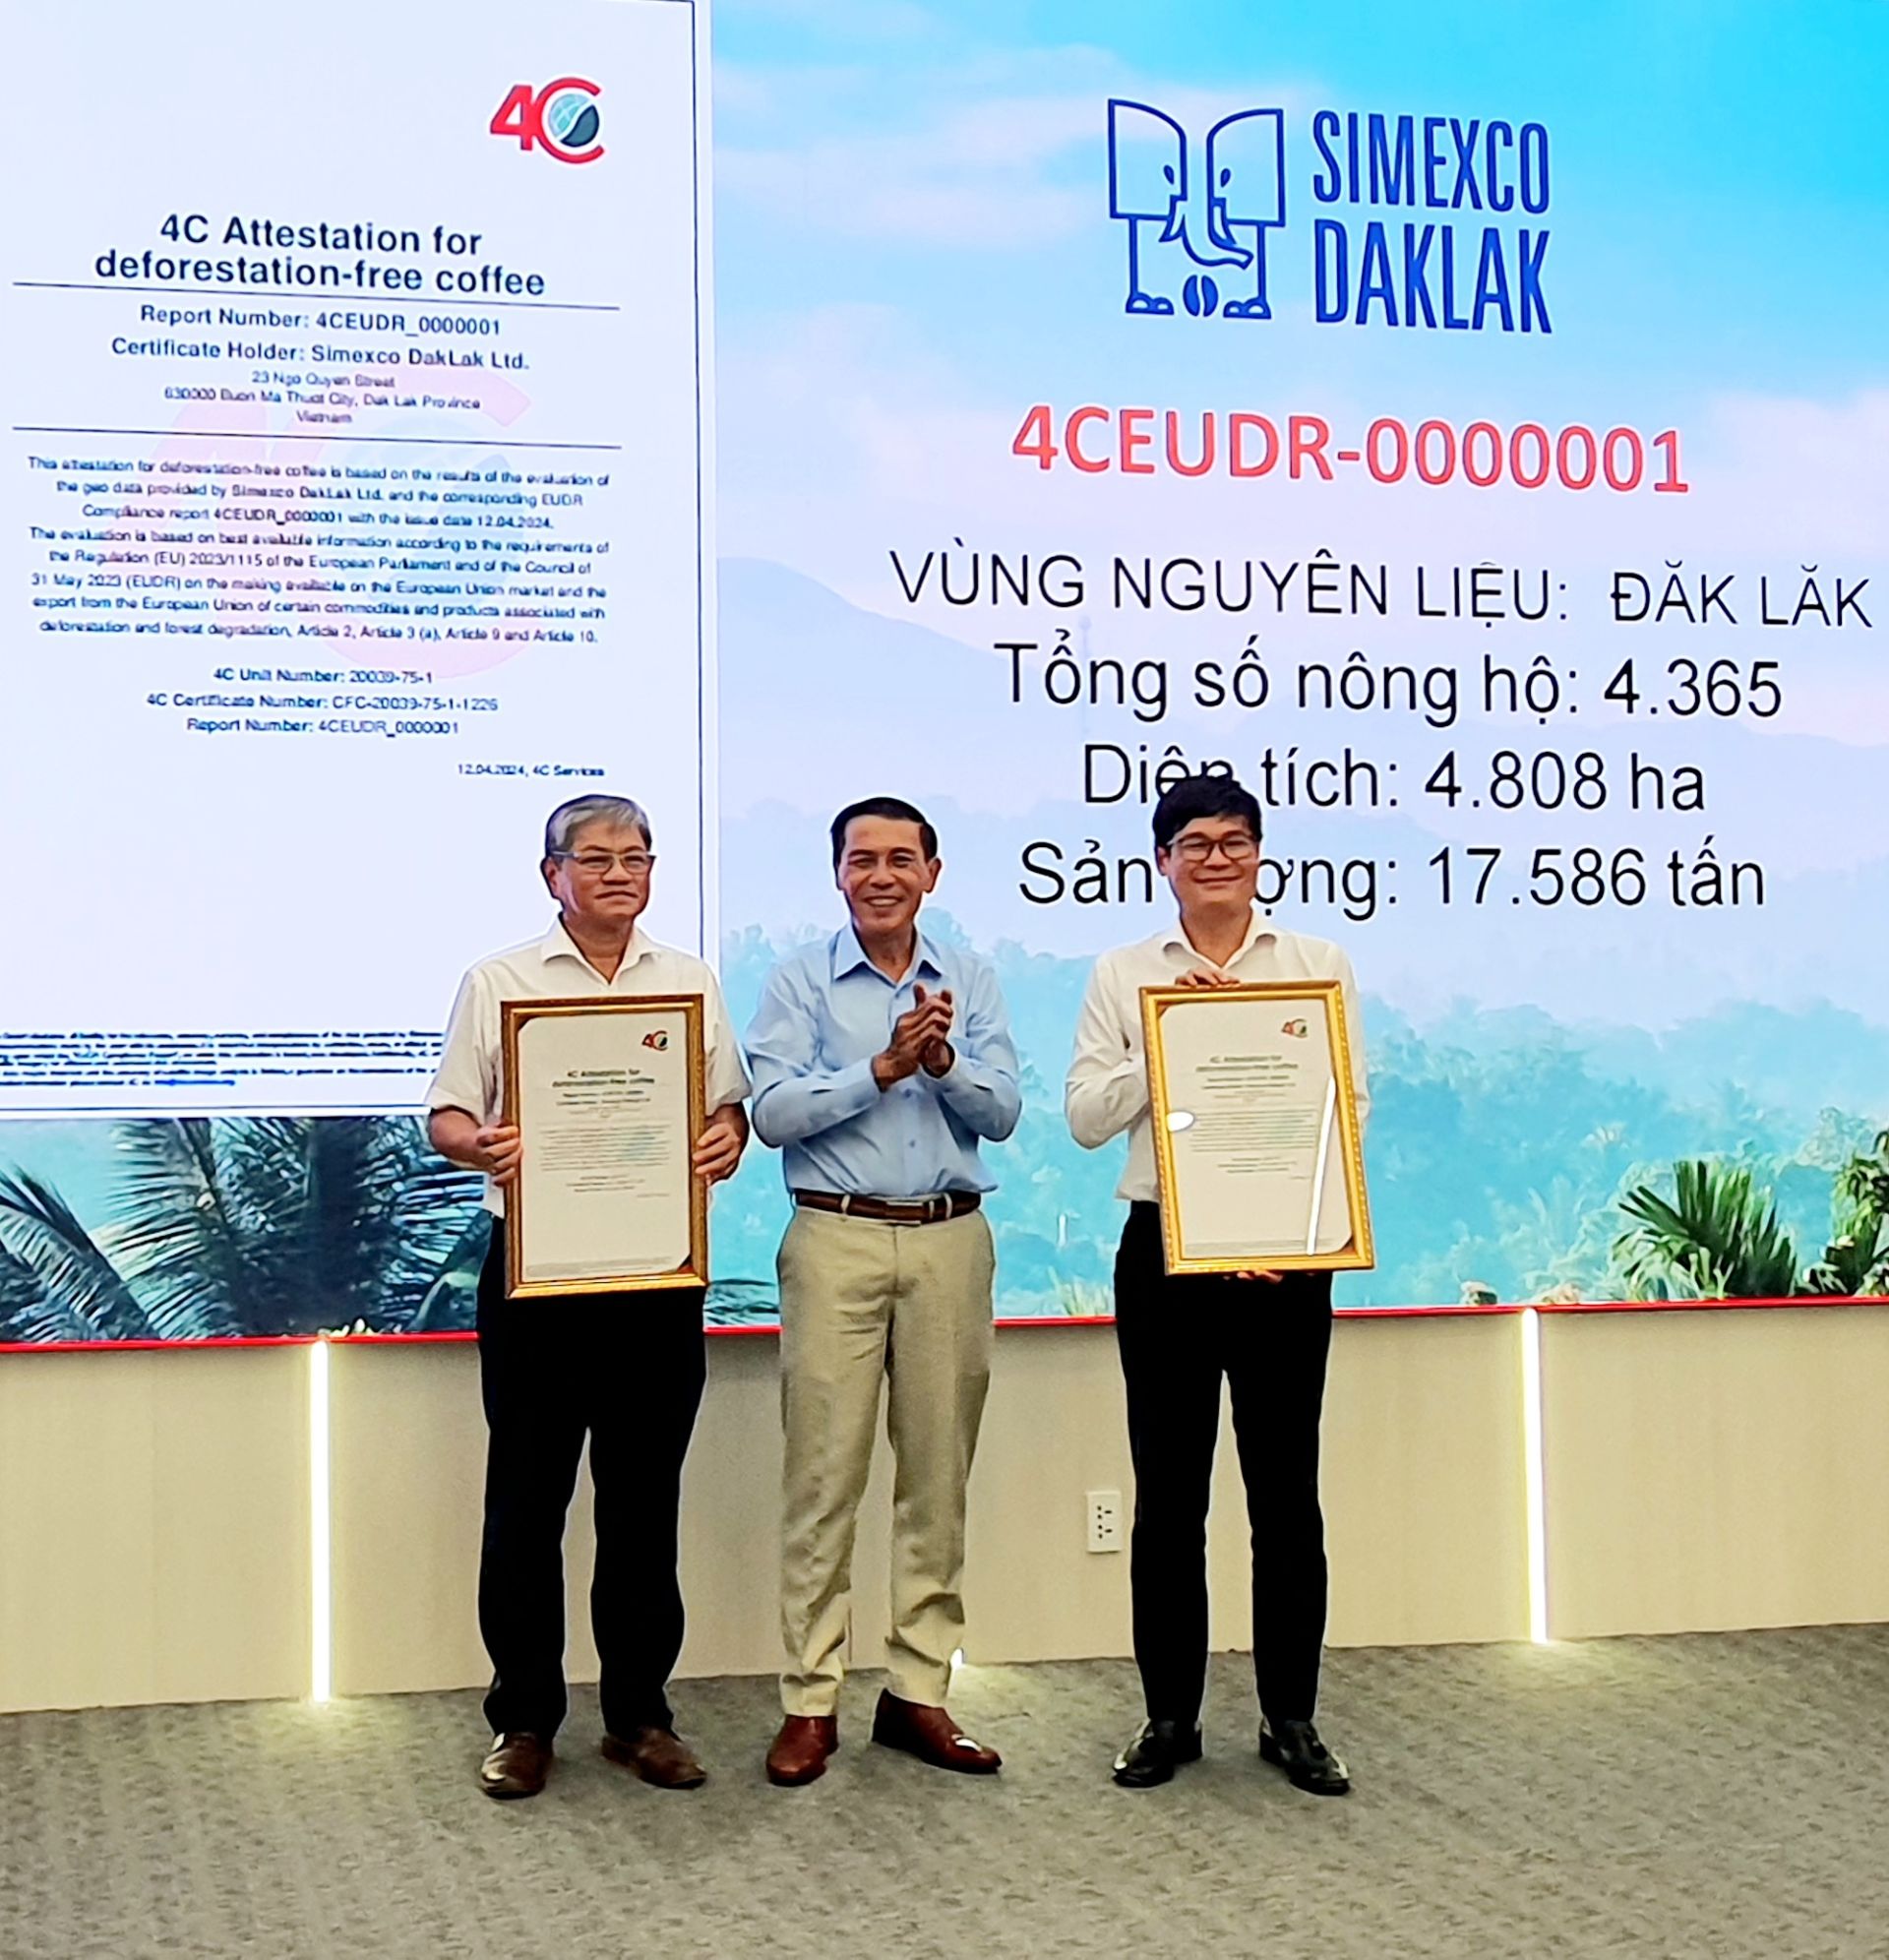 Simexco Dak Lak is the first unit to be recognised as having the world’s first two coffee raw material areas that meet EUDR standards